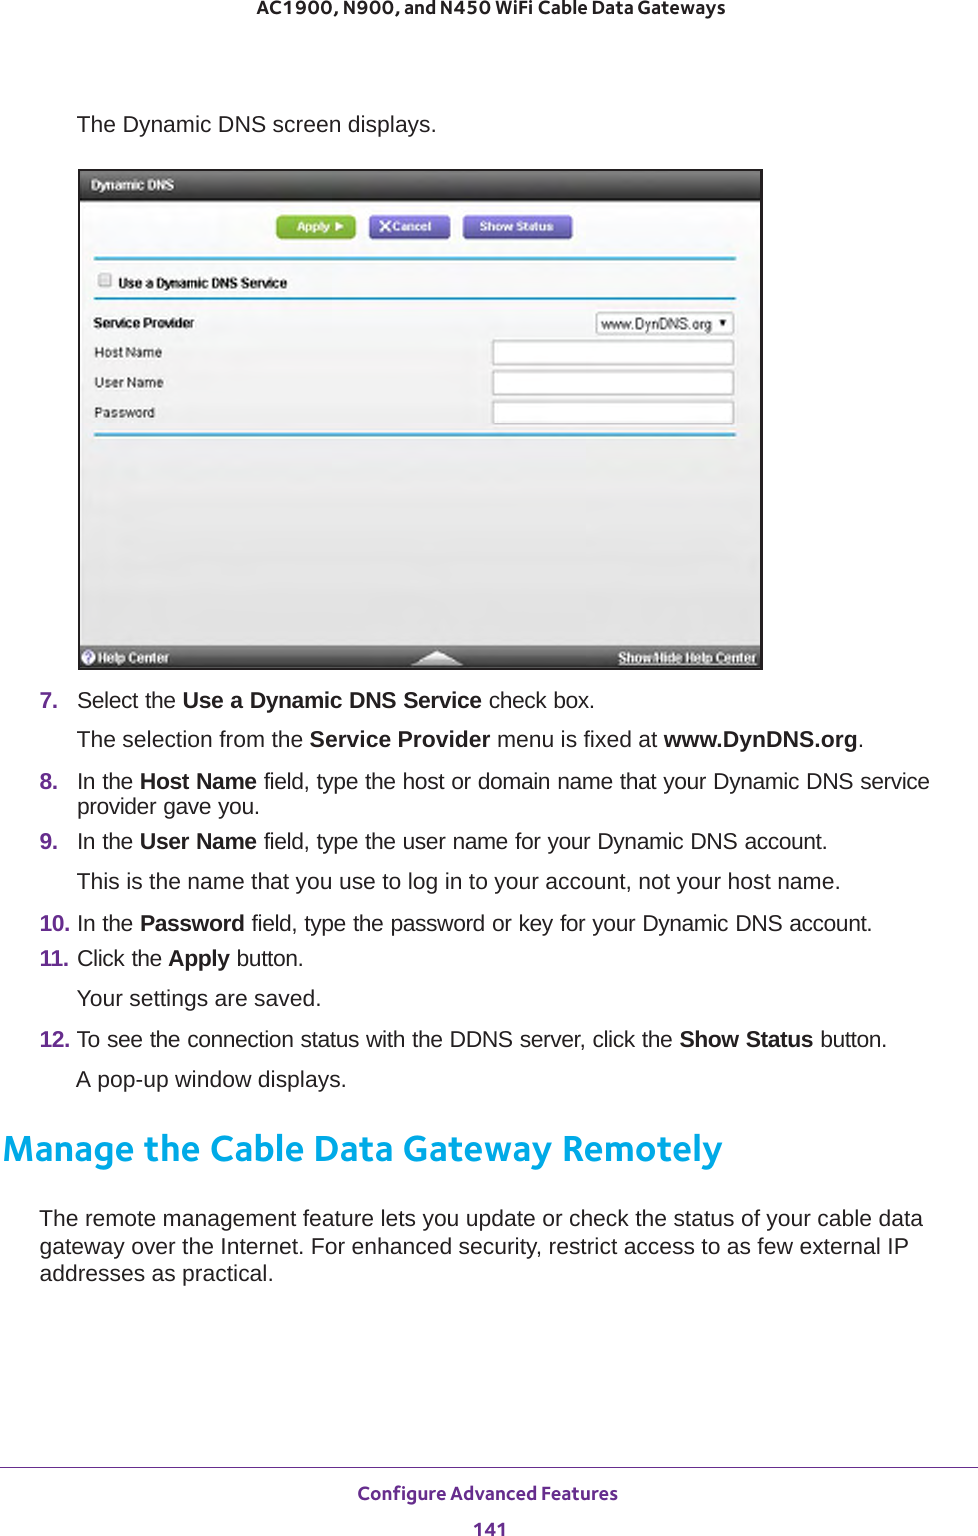 Configure Advanced Features 141 AC1900, N900, and N450 WiFi Cable Data GatewaysThe Dynamic DNS screen displays.7.  Select the Use a Dynamic DNS Service check box.The selection from the Service Provider menu is fixed at www.DynDNS.org.8.  In the Host Name field, type the host or domain name that your Dynamic DNS service provider gave you.9.  In the User Name field, type the user name for your Dynamic DNS account. This is the name that you use to log in to your account, not your host name.10. In the Password field, type the password or key for your Dynamic DNS account.11. Click the Apply button.Your settings are saved.12. To see the connection status with the DDNS server, click the Show Status button.A pop-up window displays.Manage the Cable Data Gateway RemotelyThe remote management feature lets you update or check the status of your cable data gateway over the Internet. For enhanced security, restrict access to as few external IP addresses as practical.